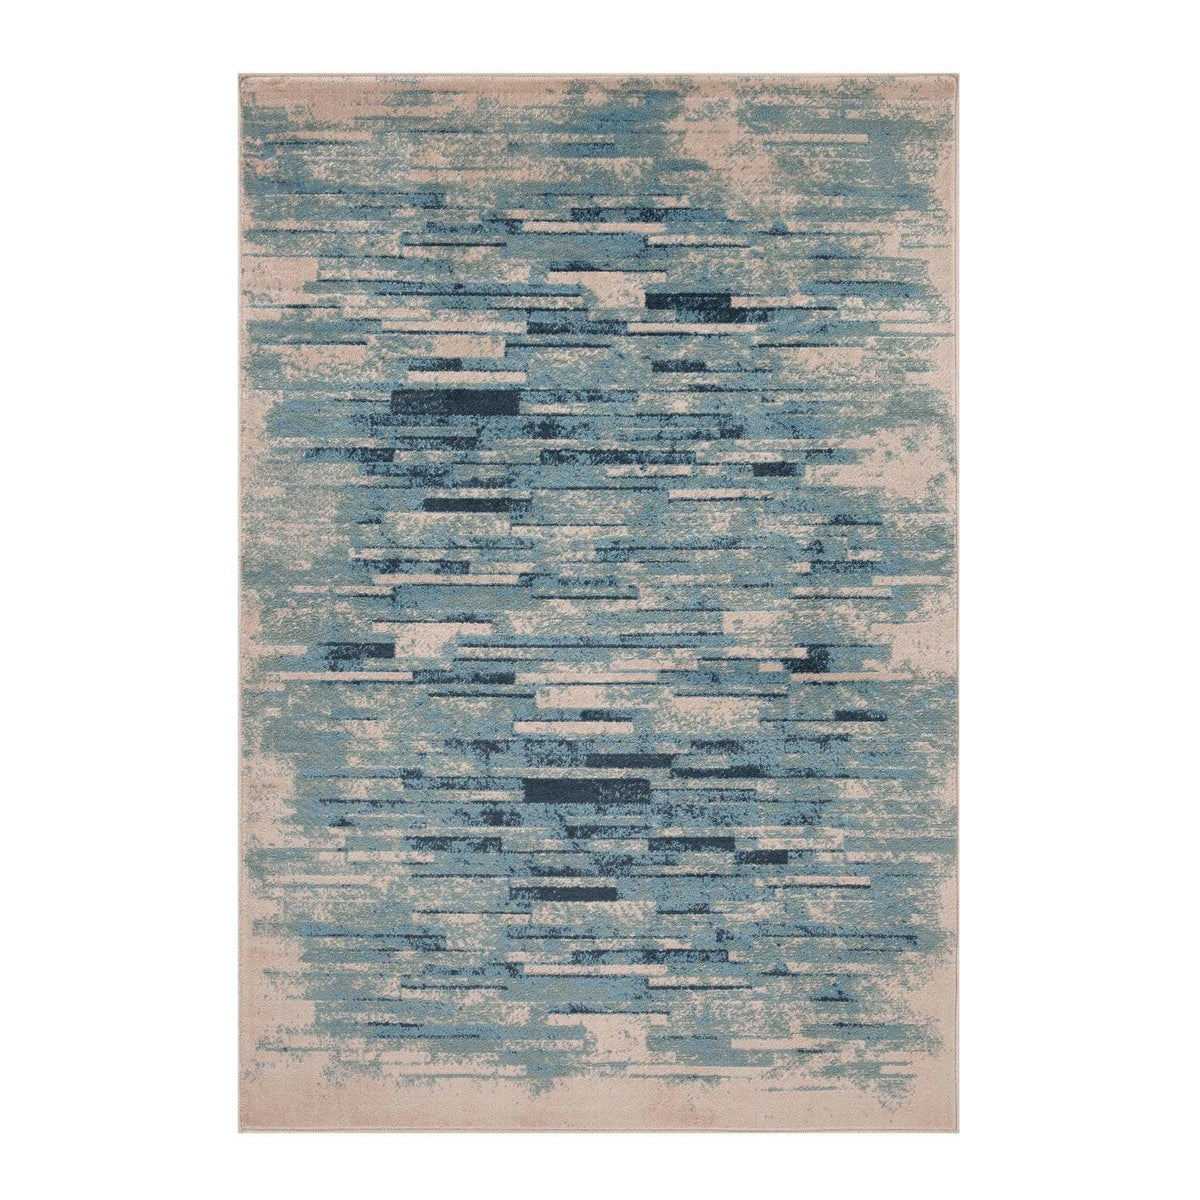 Abstract Graphic Design Indoor Area Rug or Runner - Blue